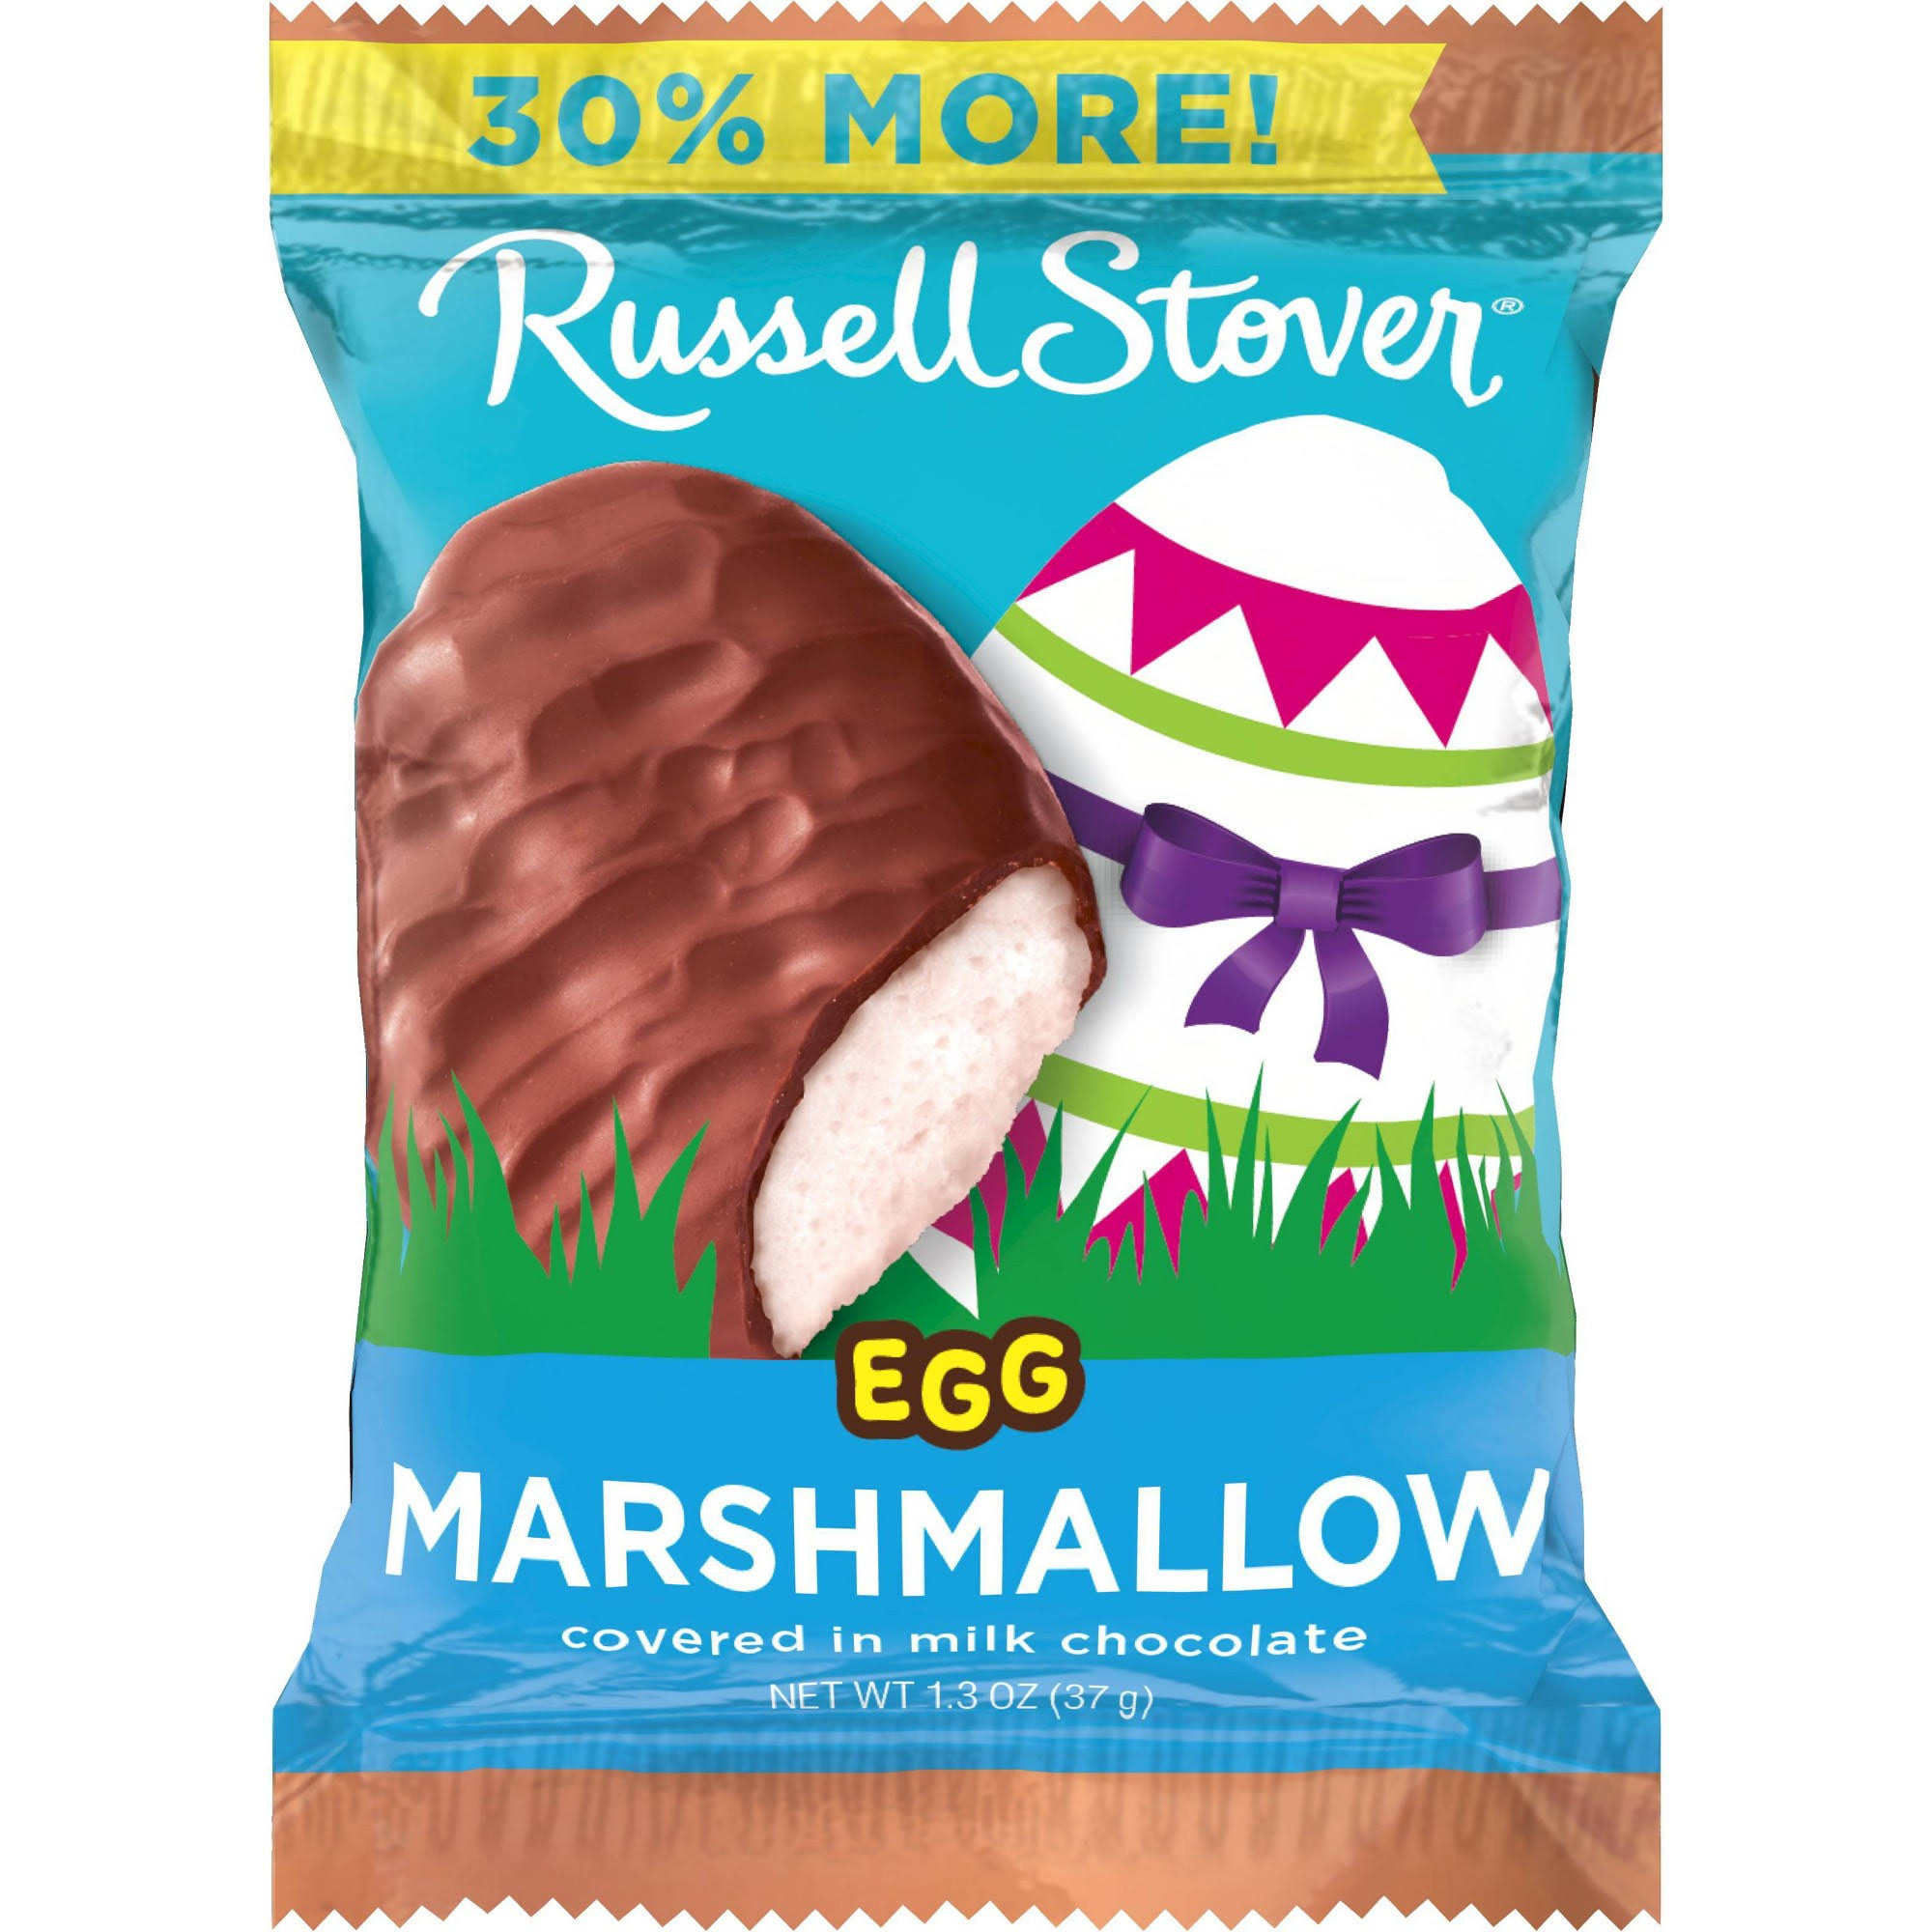 Russell Stover Milk Chocolate Marshmallow Egg, 1.3 oz.